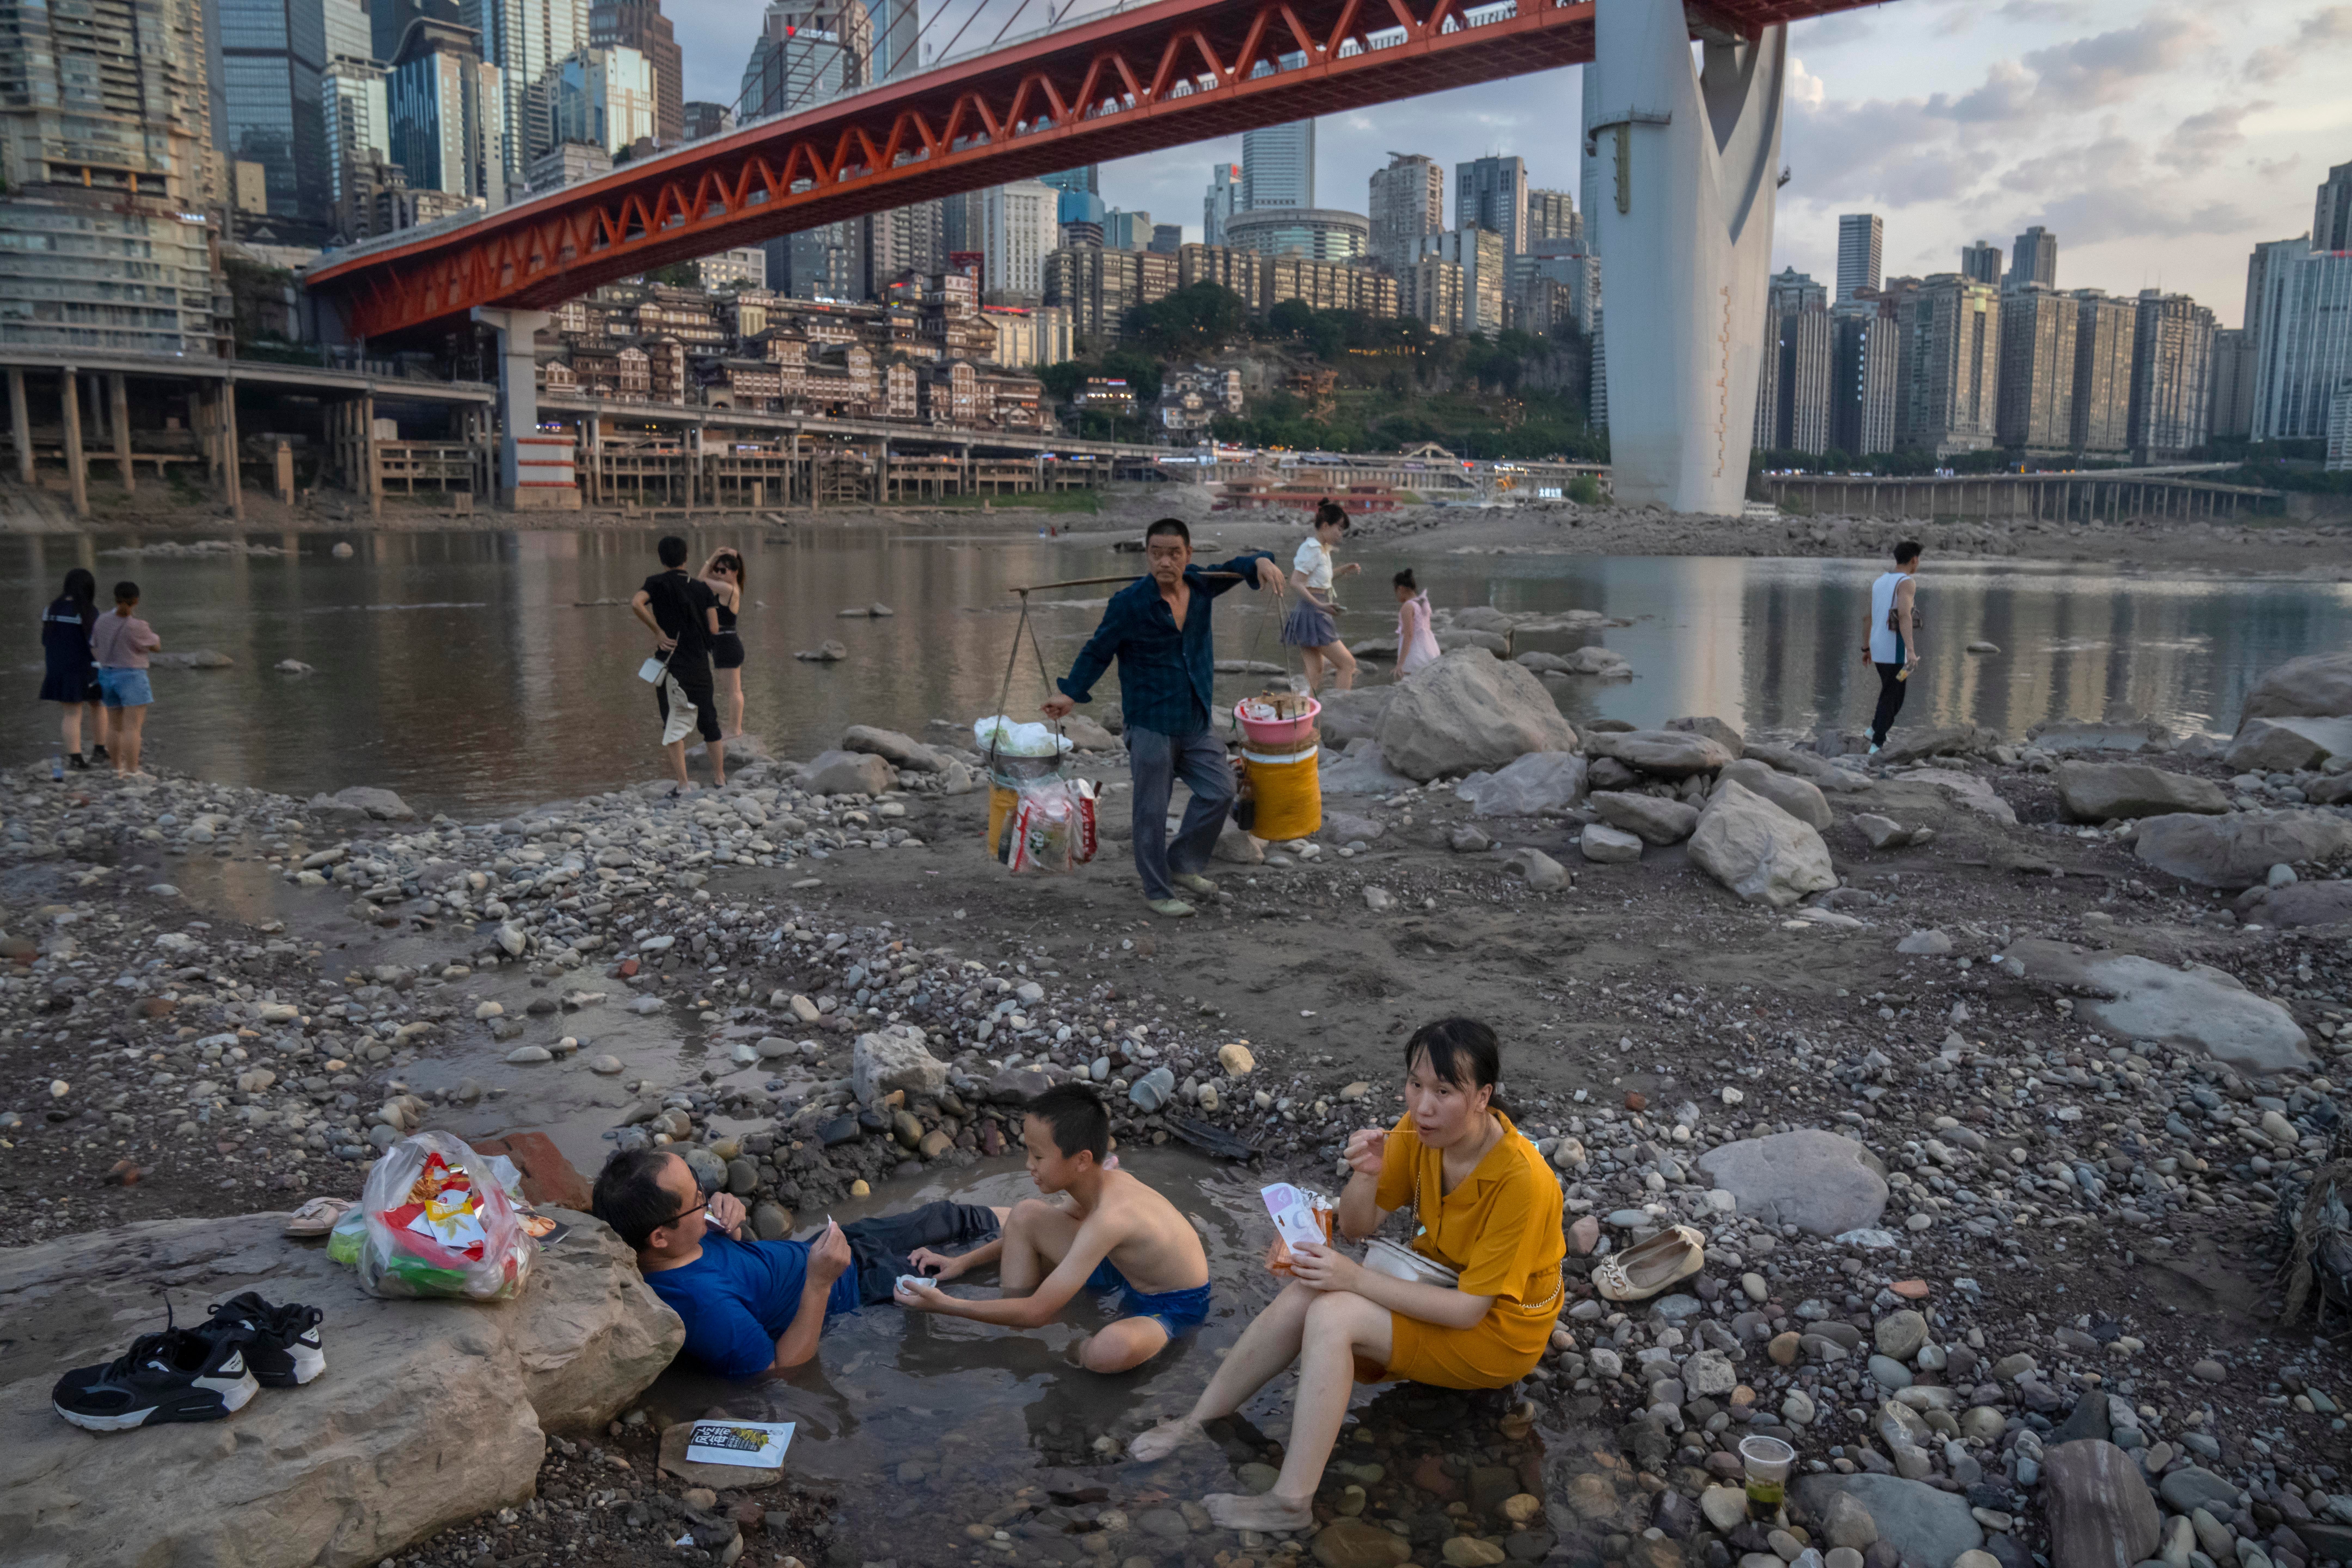 People sit in a shallow pool of water in the riverbed of the Jialing River, a tributary of the Yangtze, in southwestern China's Chongqing